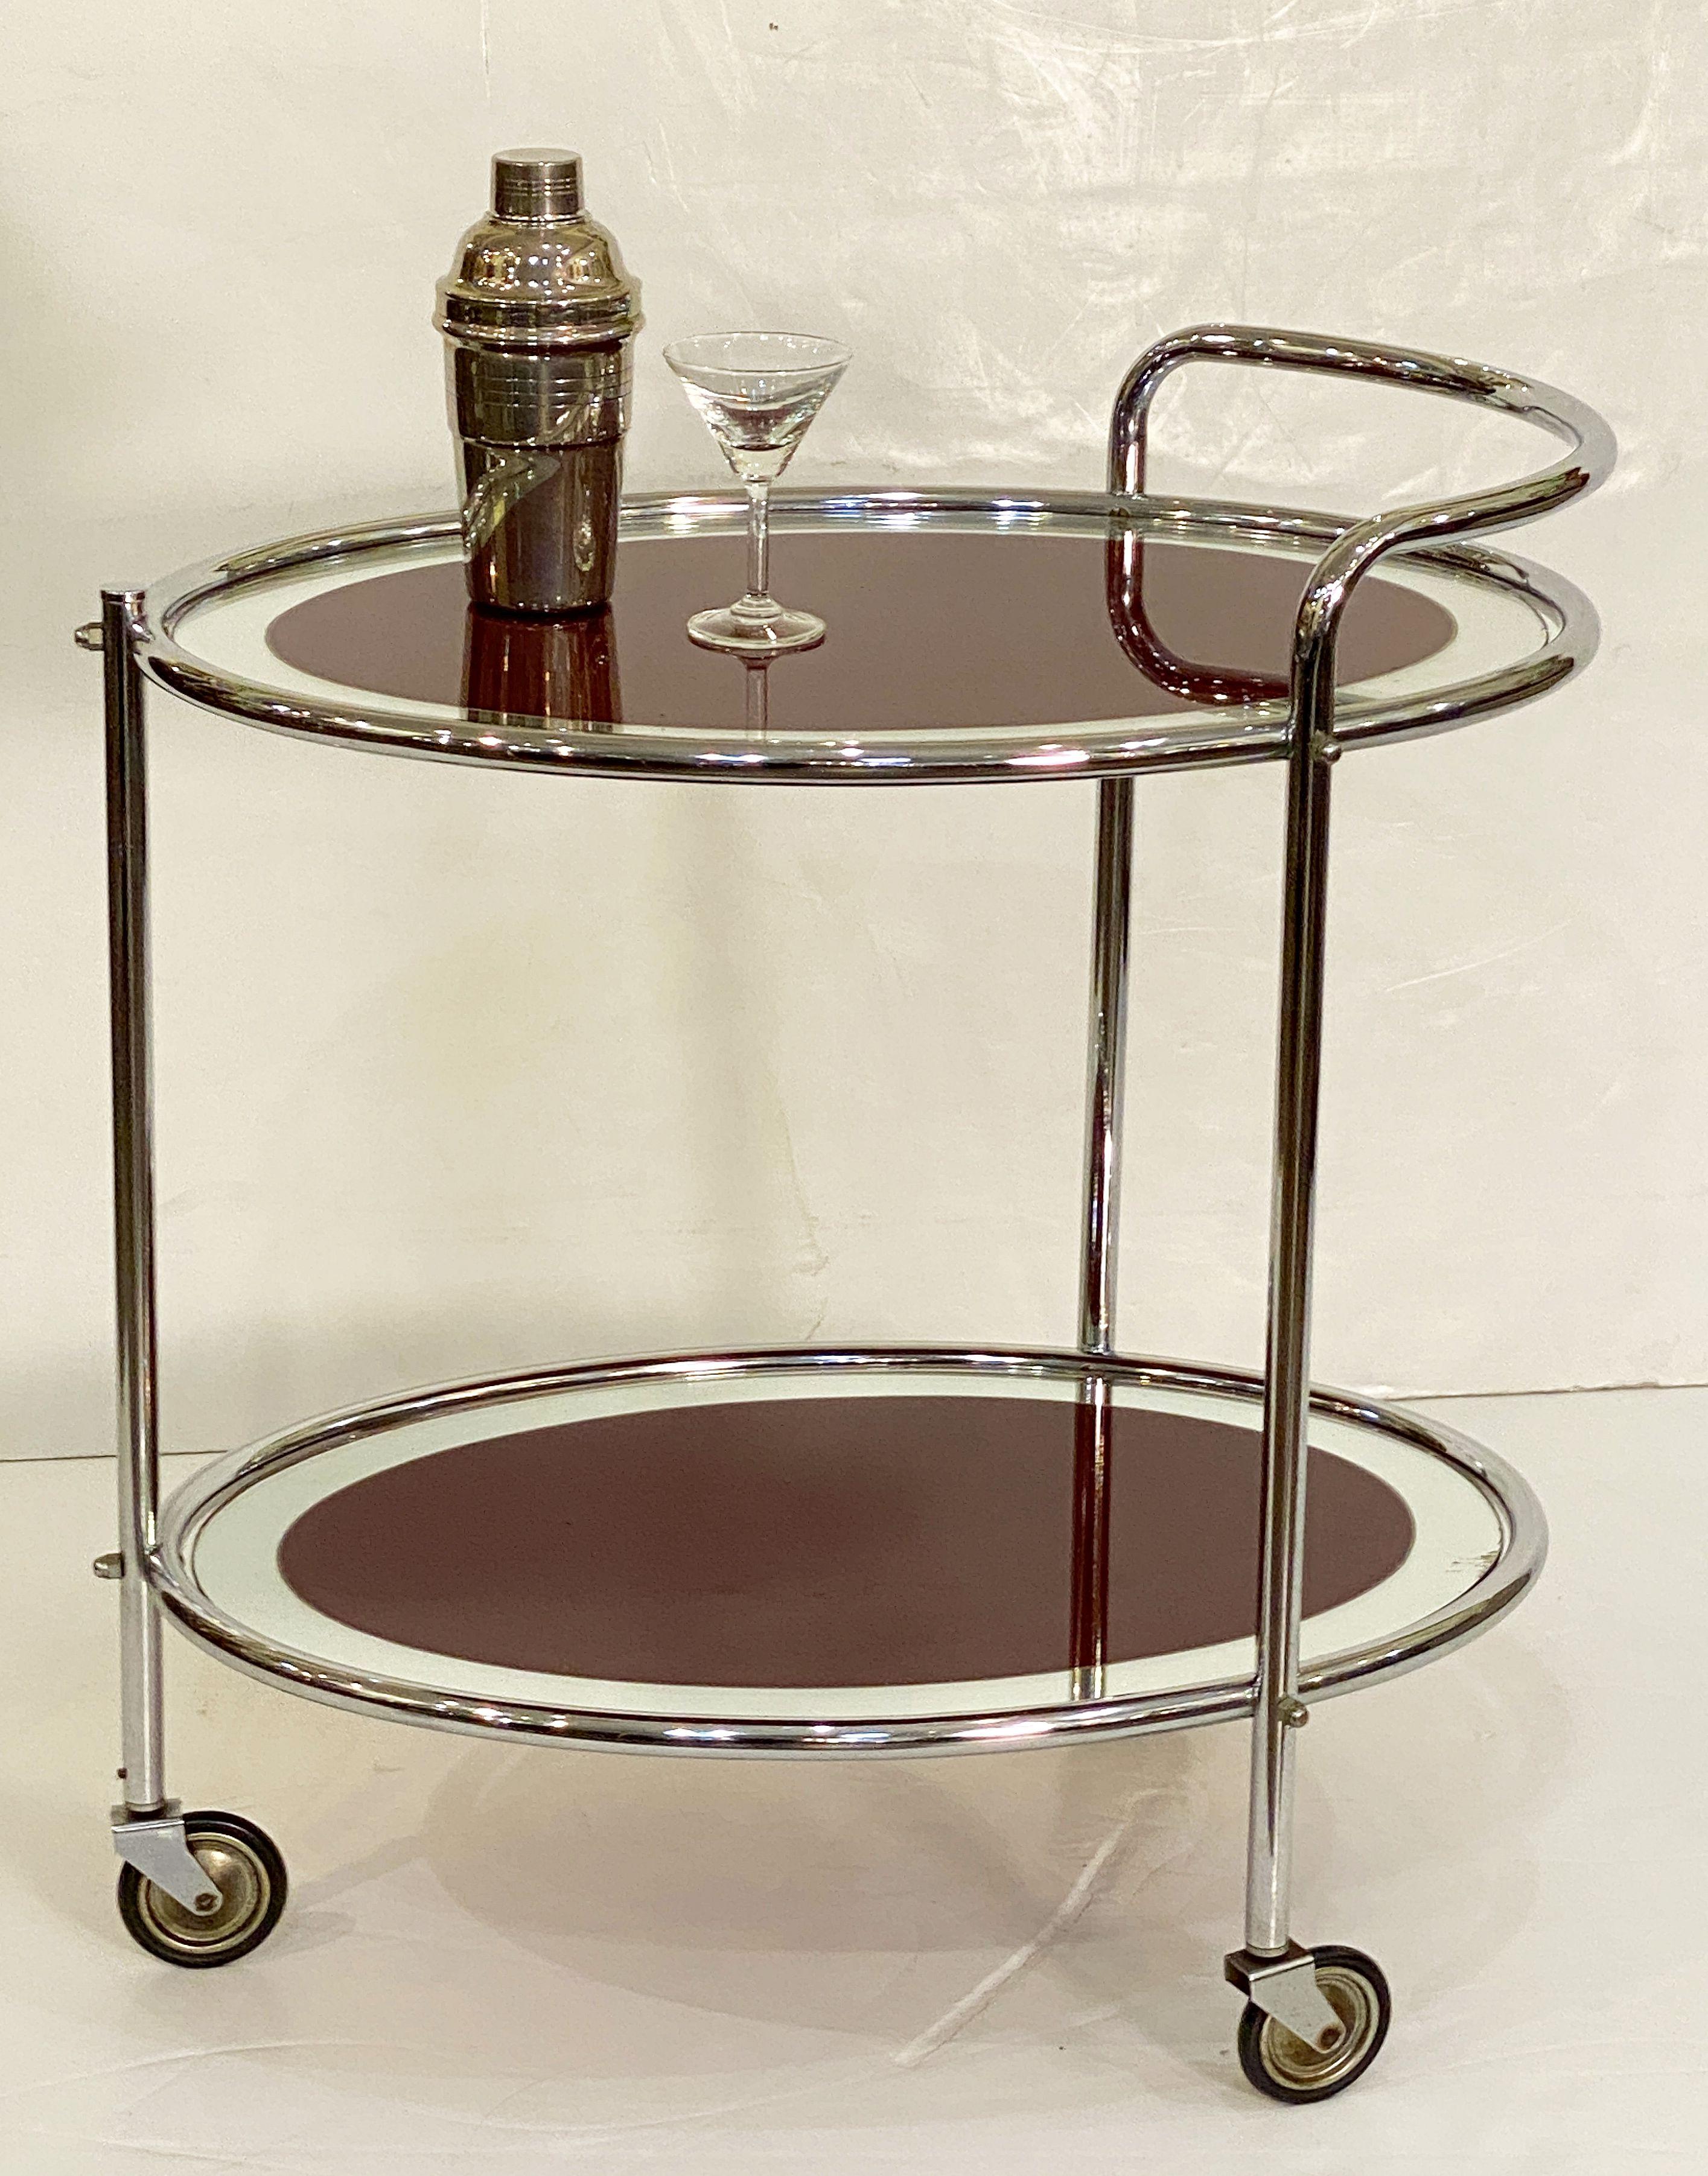 A fine English drinks trolley or bar cart of chrome and mirrored glass from the Art Deco era, featuring two oval mirrored glass tiers on stylish chrome mounts and standing on three vintage rolling casters.